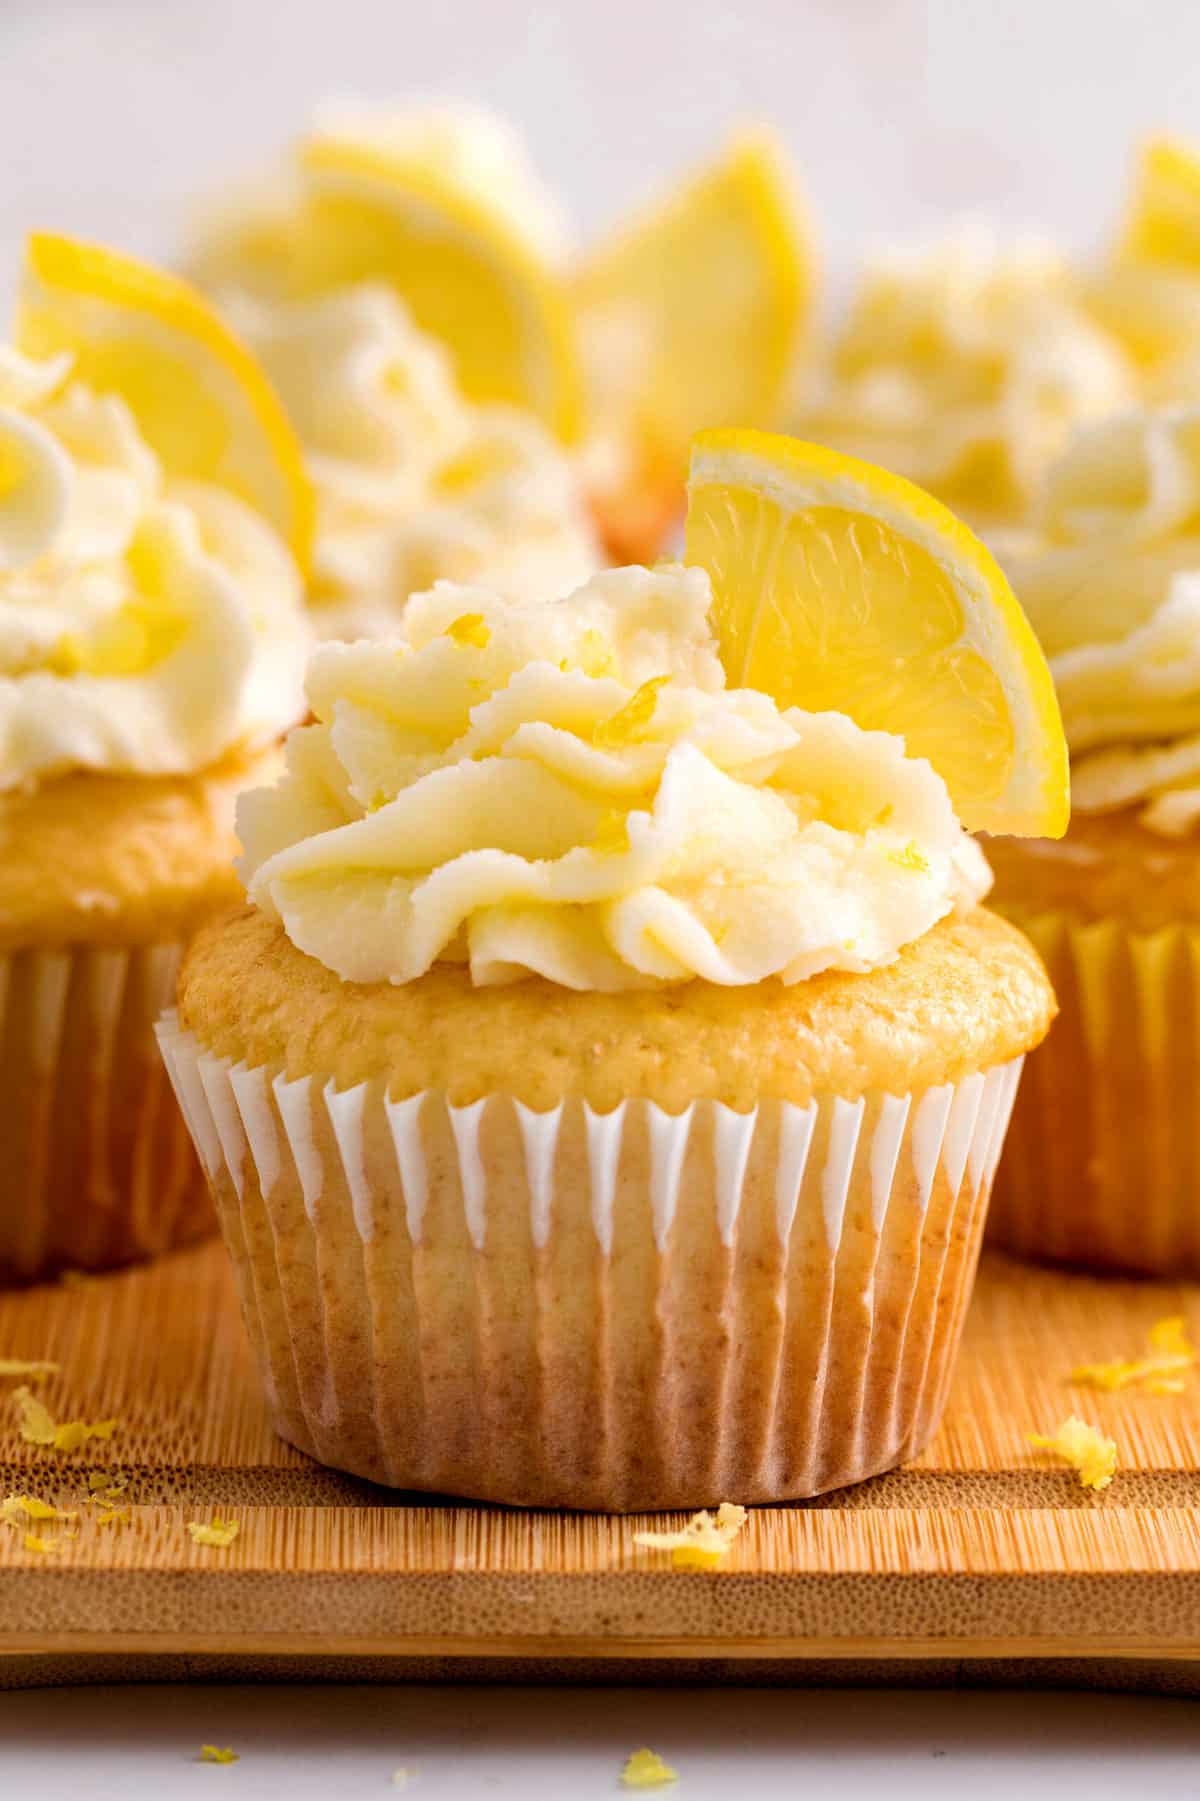 close up image of a lemon cupcake with frosting and a fresh slice of lemon